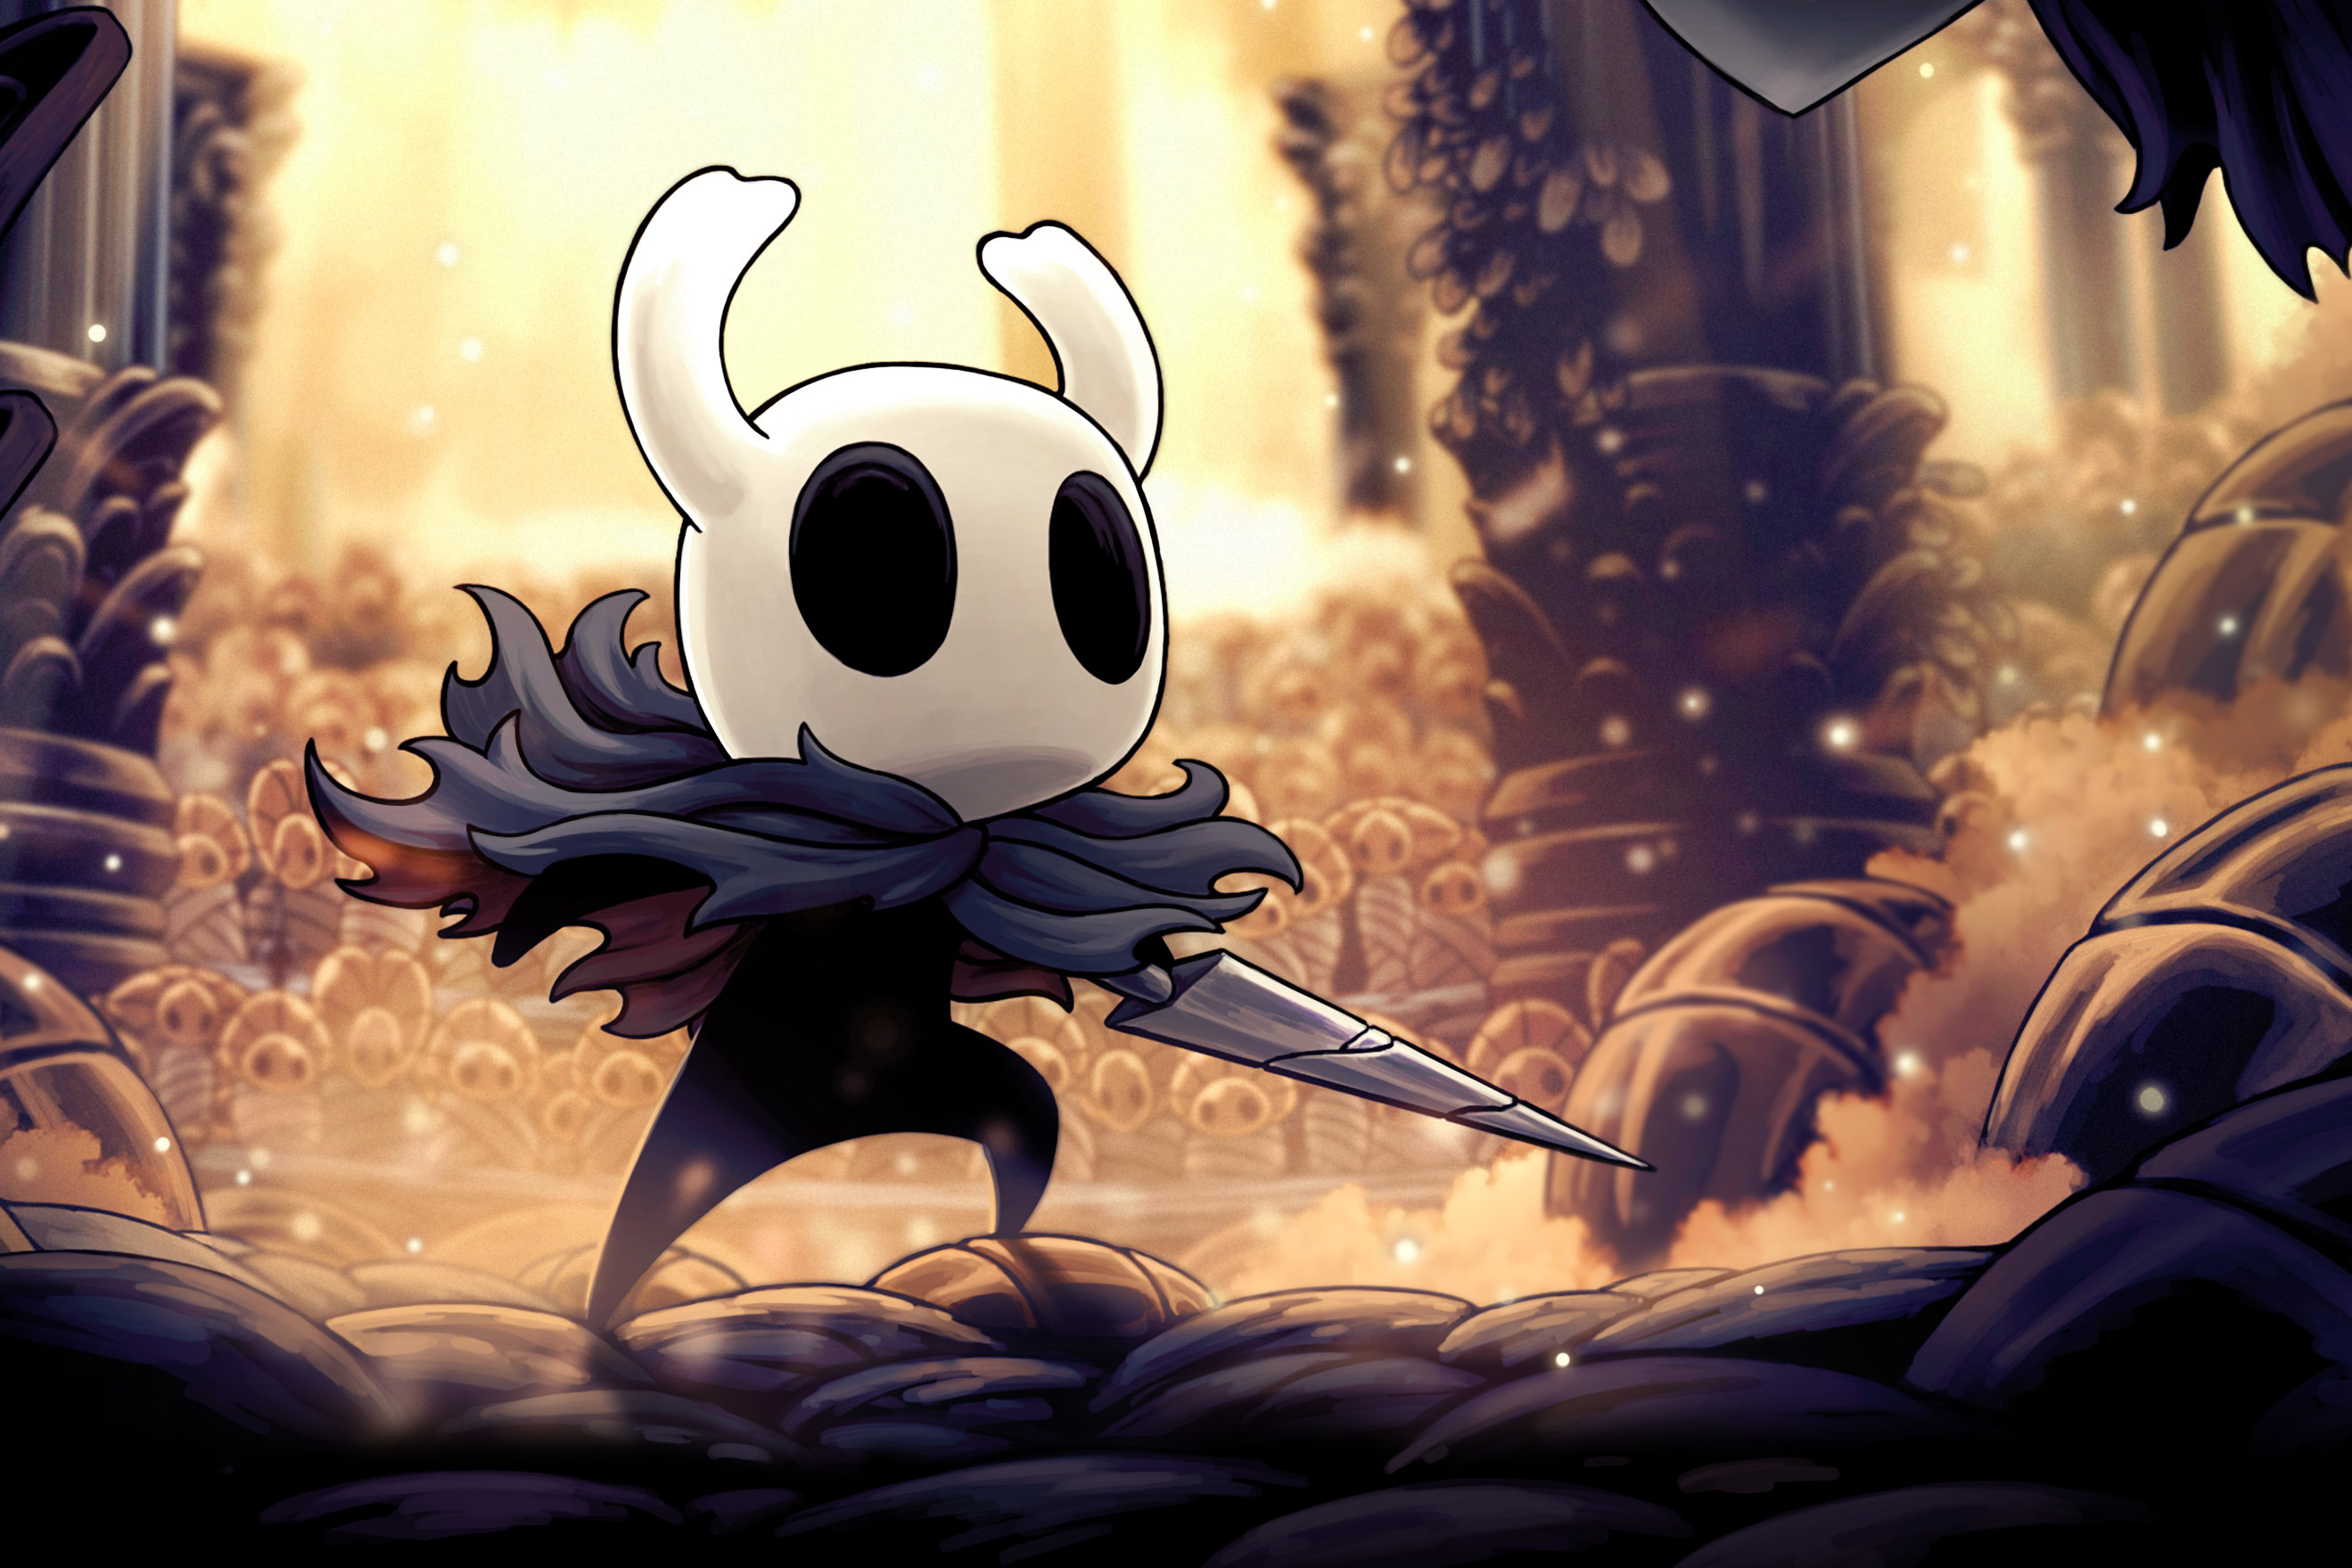 Character art of the Hollow Knight from the game Hollow Knight, made by Team Cherry